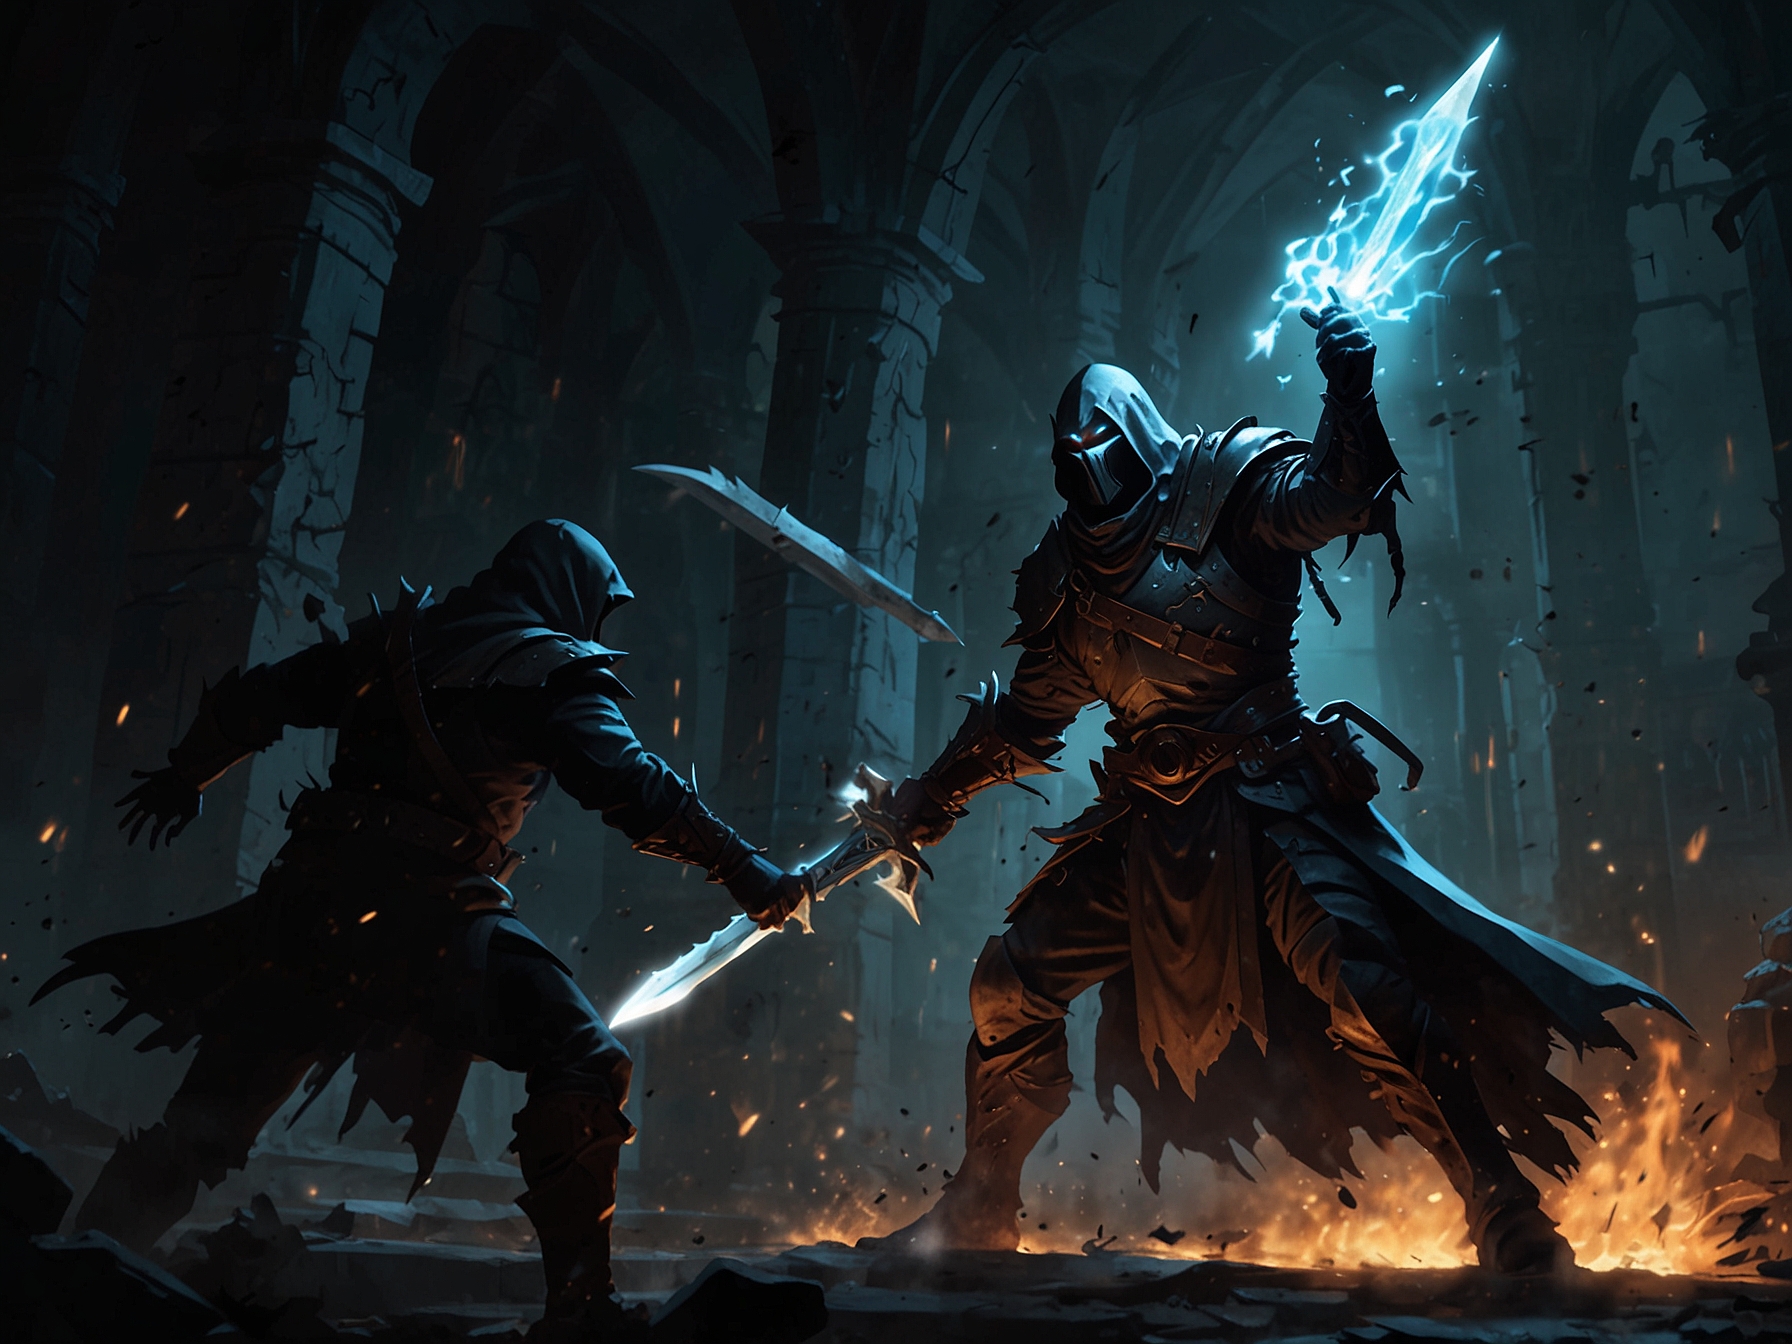 The climactic battle against the Malediction Warden within the dark crypt, showcasing the boss's dark magic and massive cursed blade, with the adventurer skillfully dodging a powerful attack.